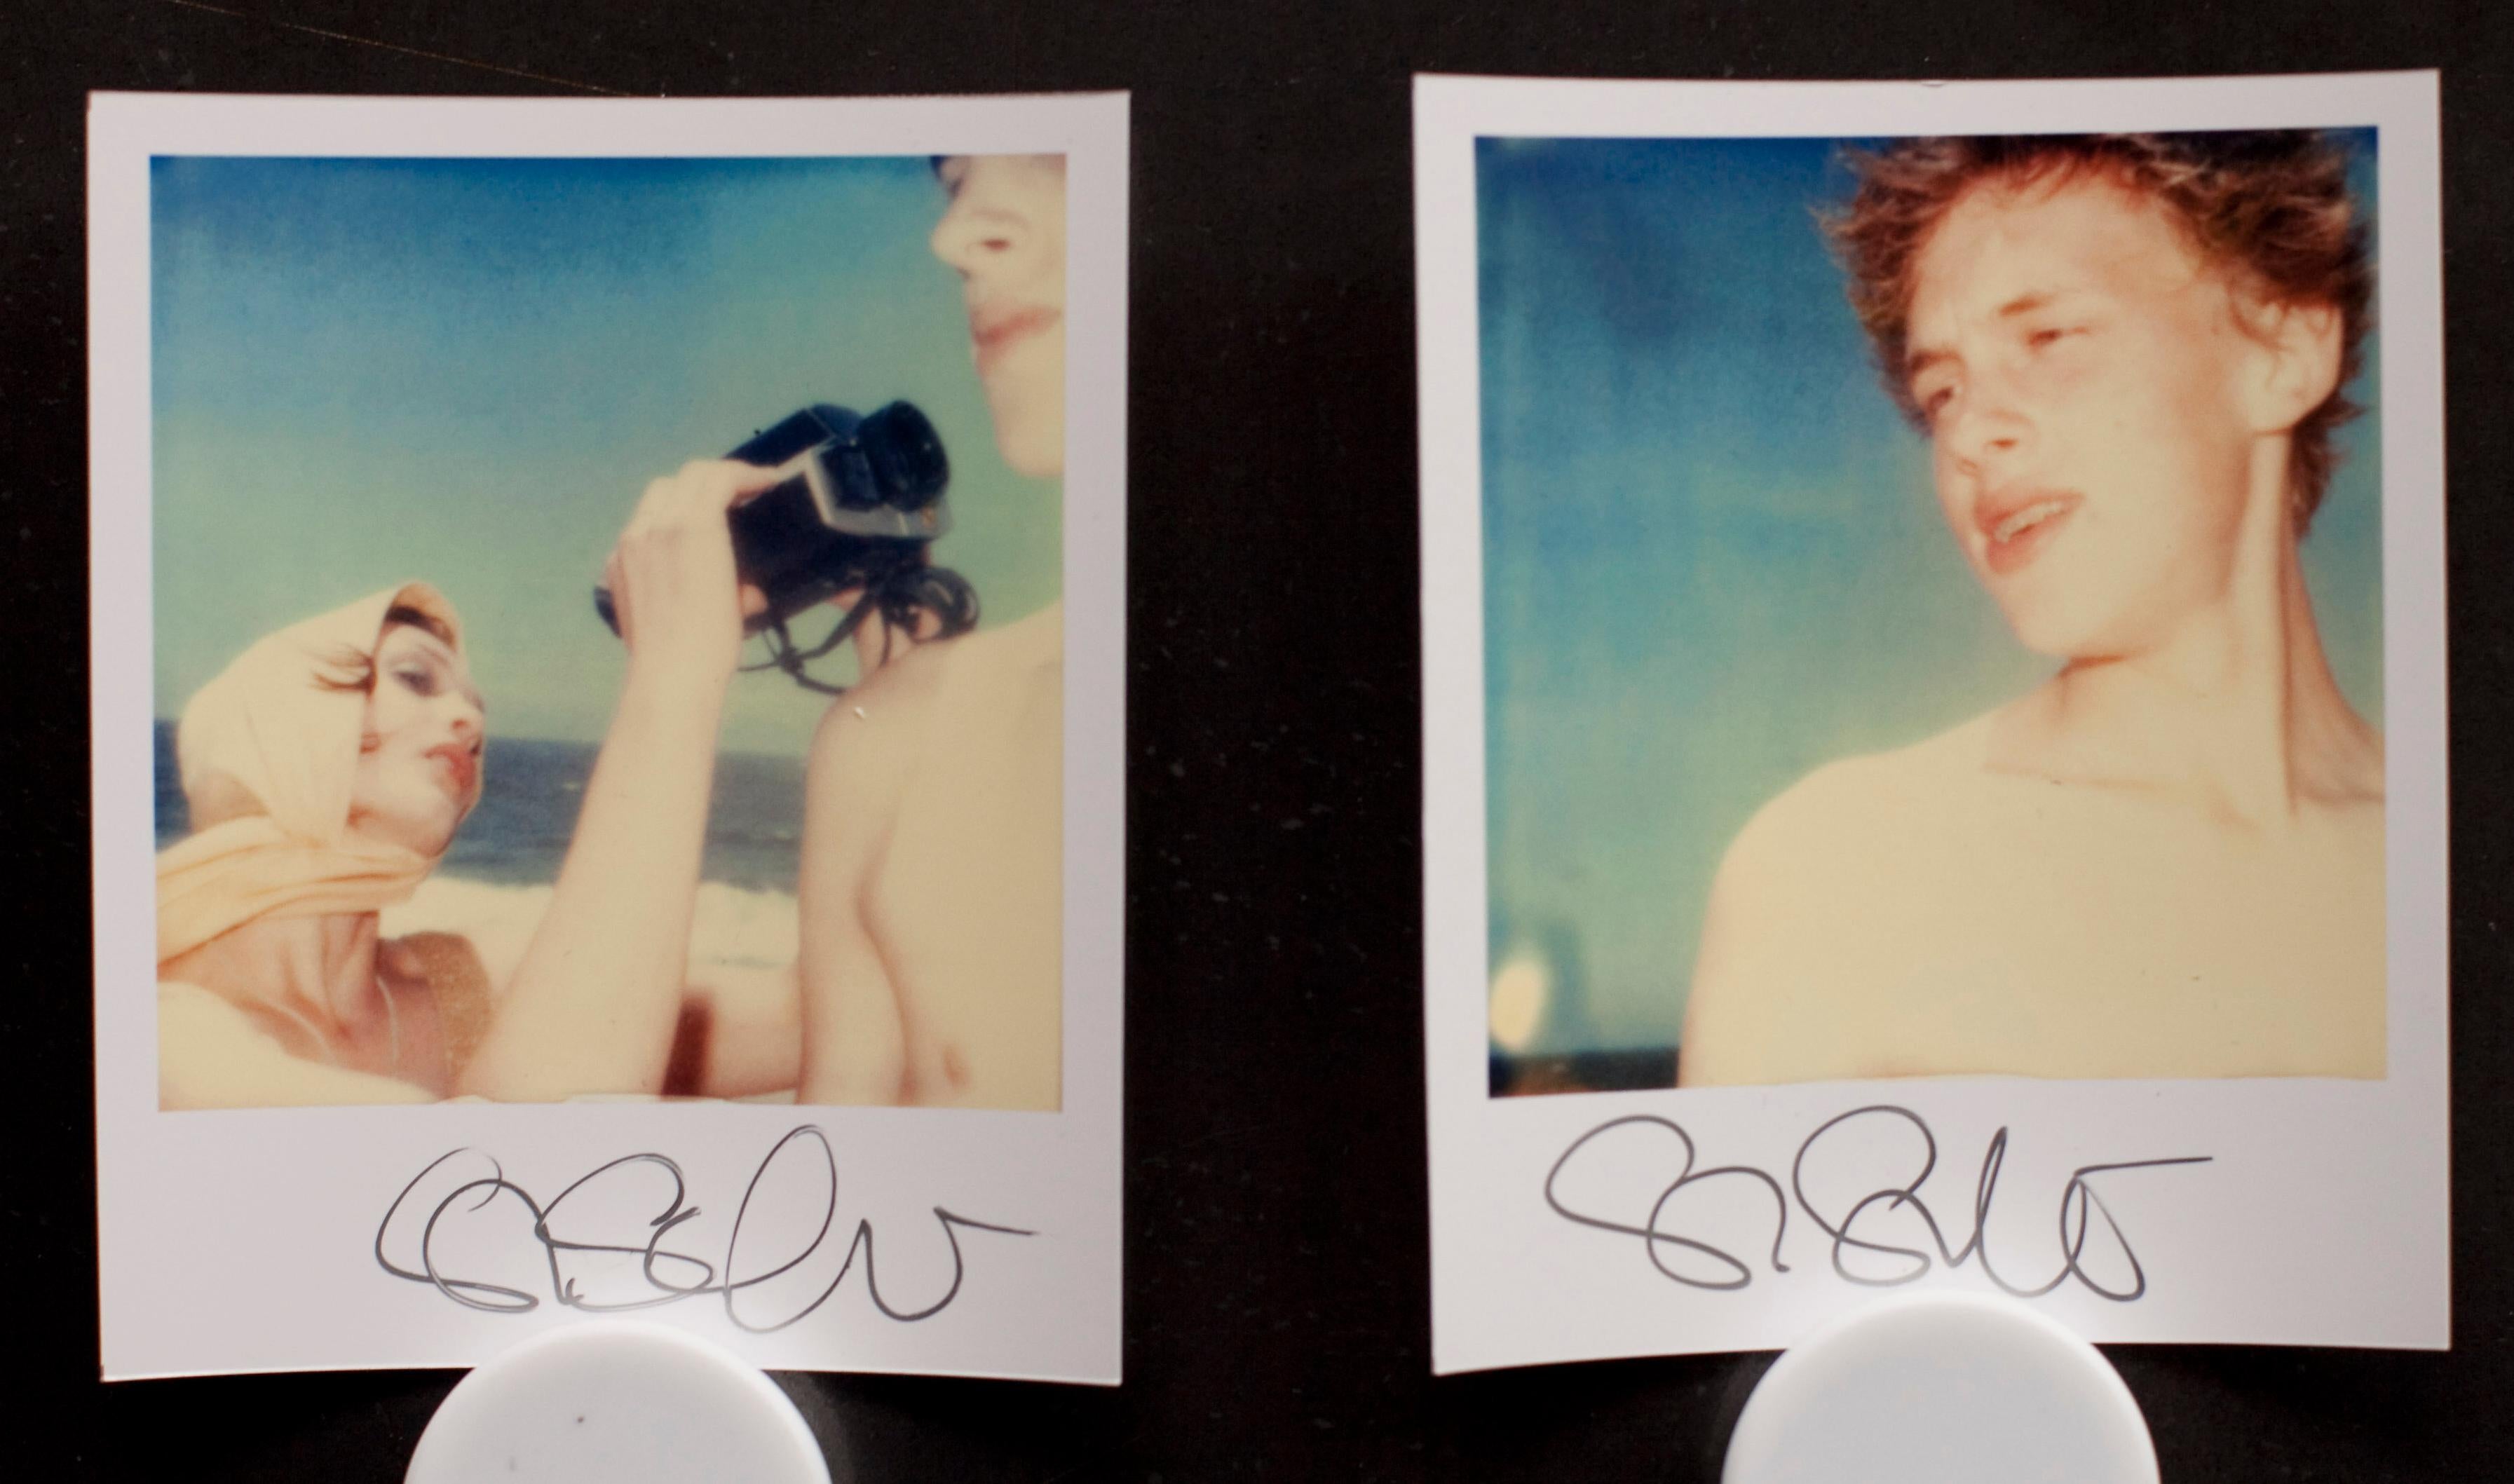 2 Stefanie Schneider's Minis
from the Beachshoot: The Diva and the Boy
signed on front, not mounted
Lambda digital Color Photographs based on original expired Polaroid photographs

Polaroid sized open Editions 1999-2013
each 10.7 x 8.8cm (Image